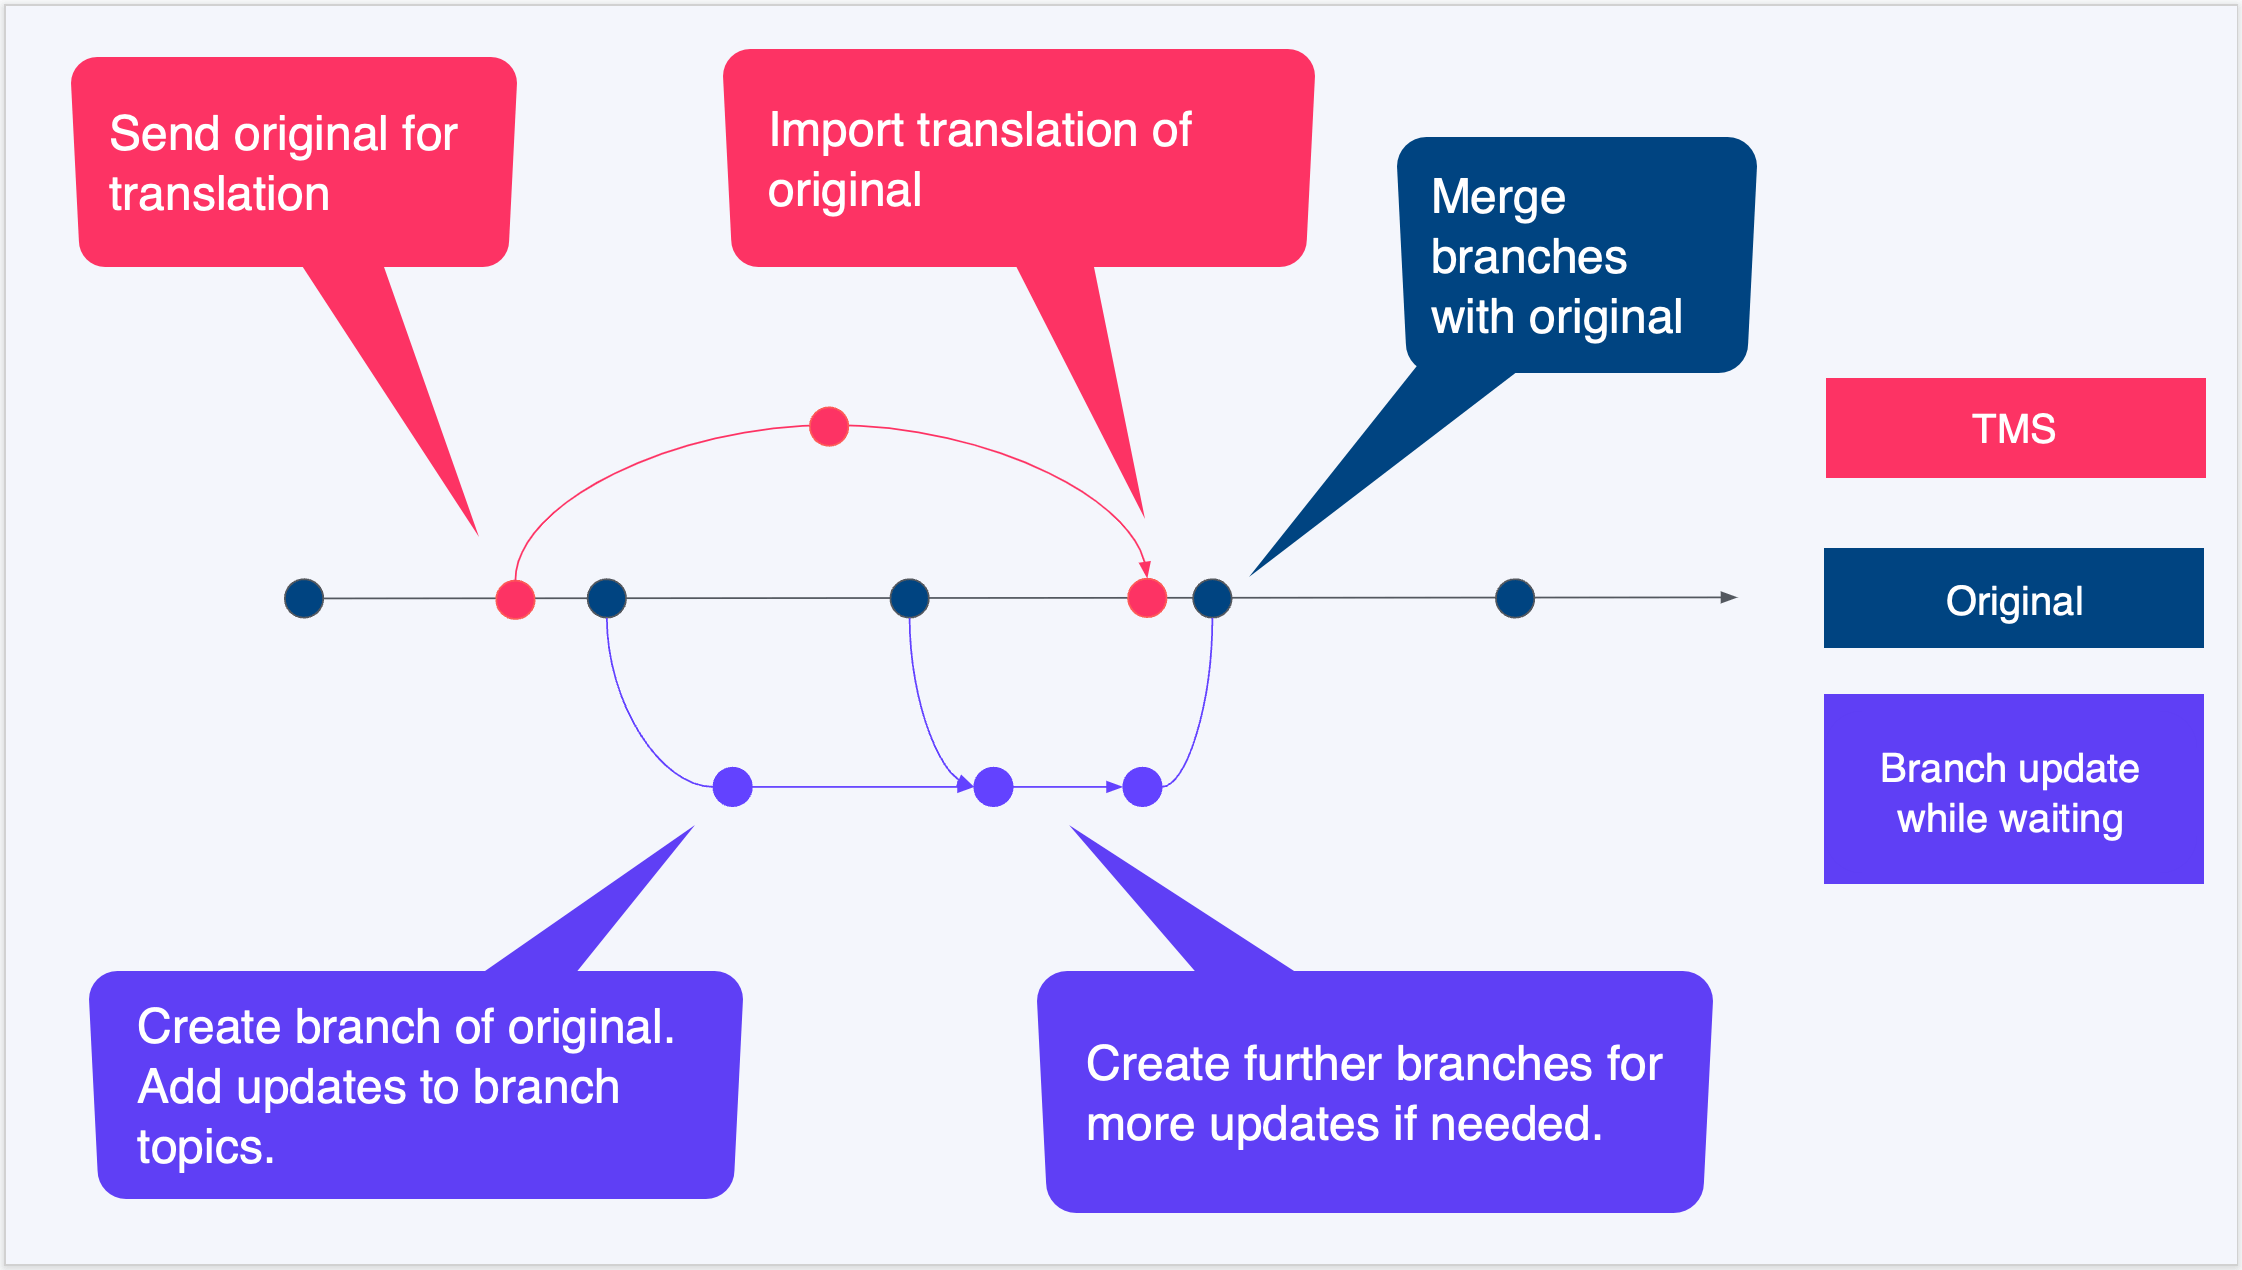 Diagram showing process for updating content while waiting for translations. Starts with sending original content to translators. Then branch original content and make updates in branch. Wait until translation comes back. Then merge update branch with original branch and send updates for translation.